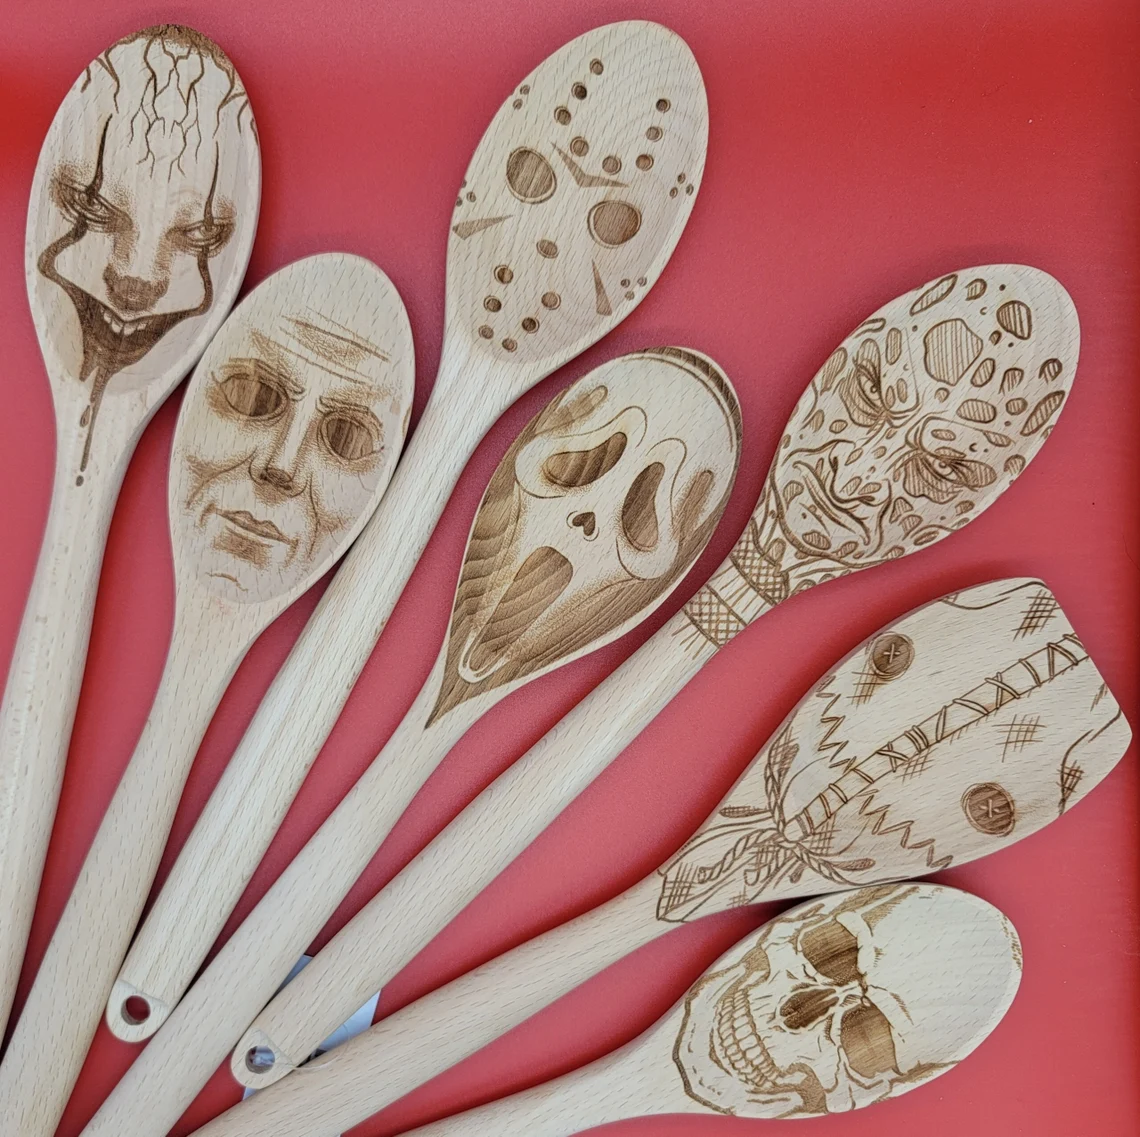 🎃Hallows' Day Scary Spoon👻